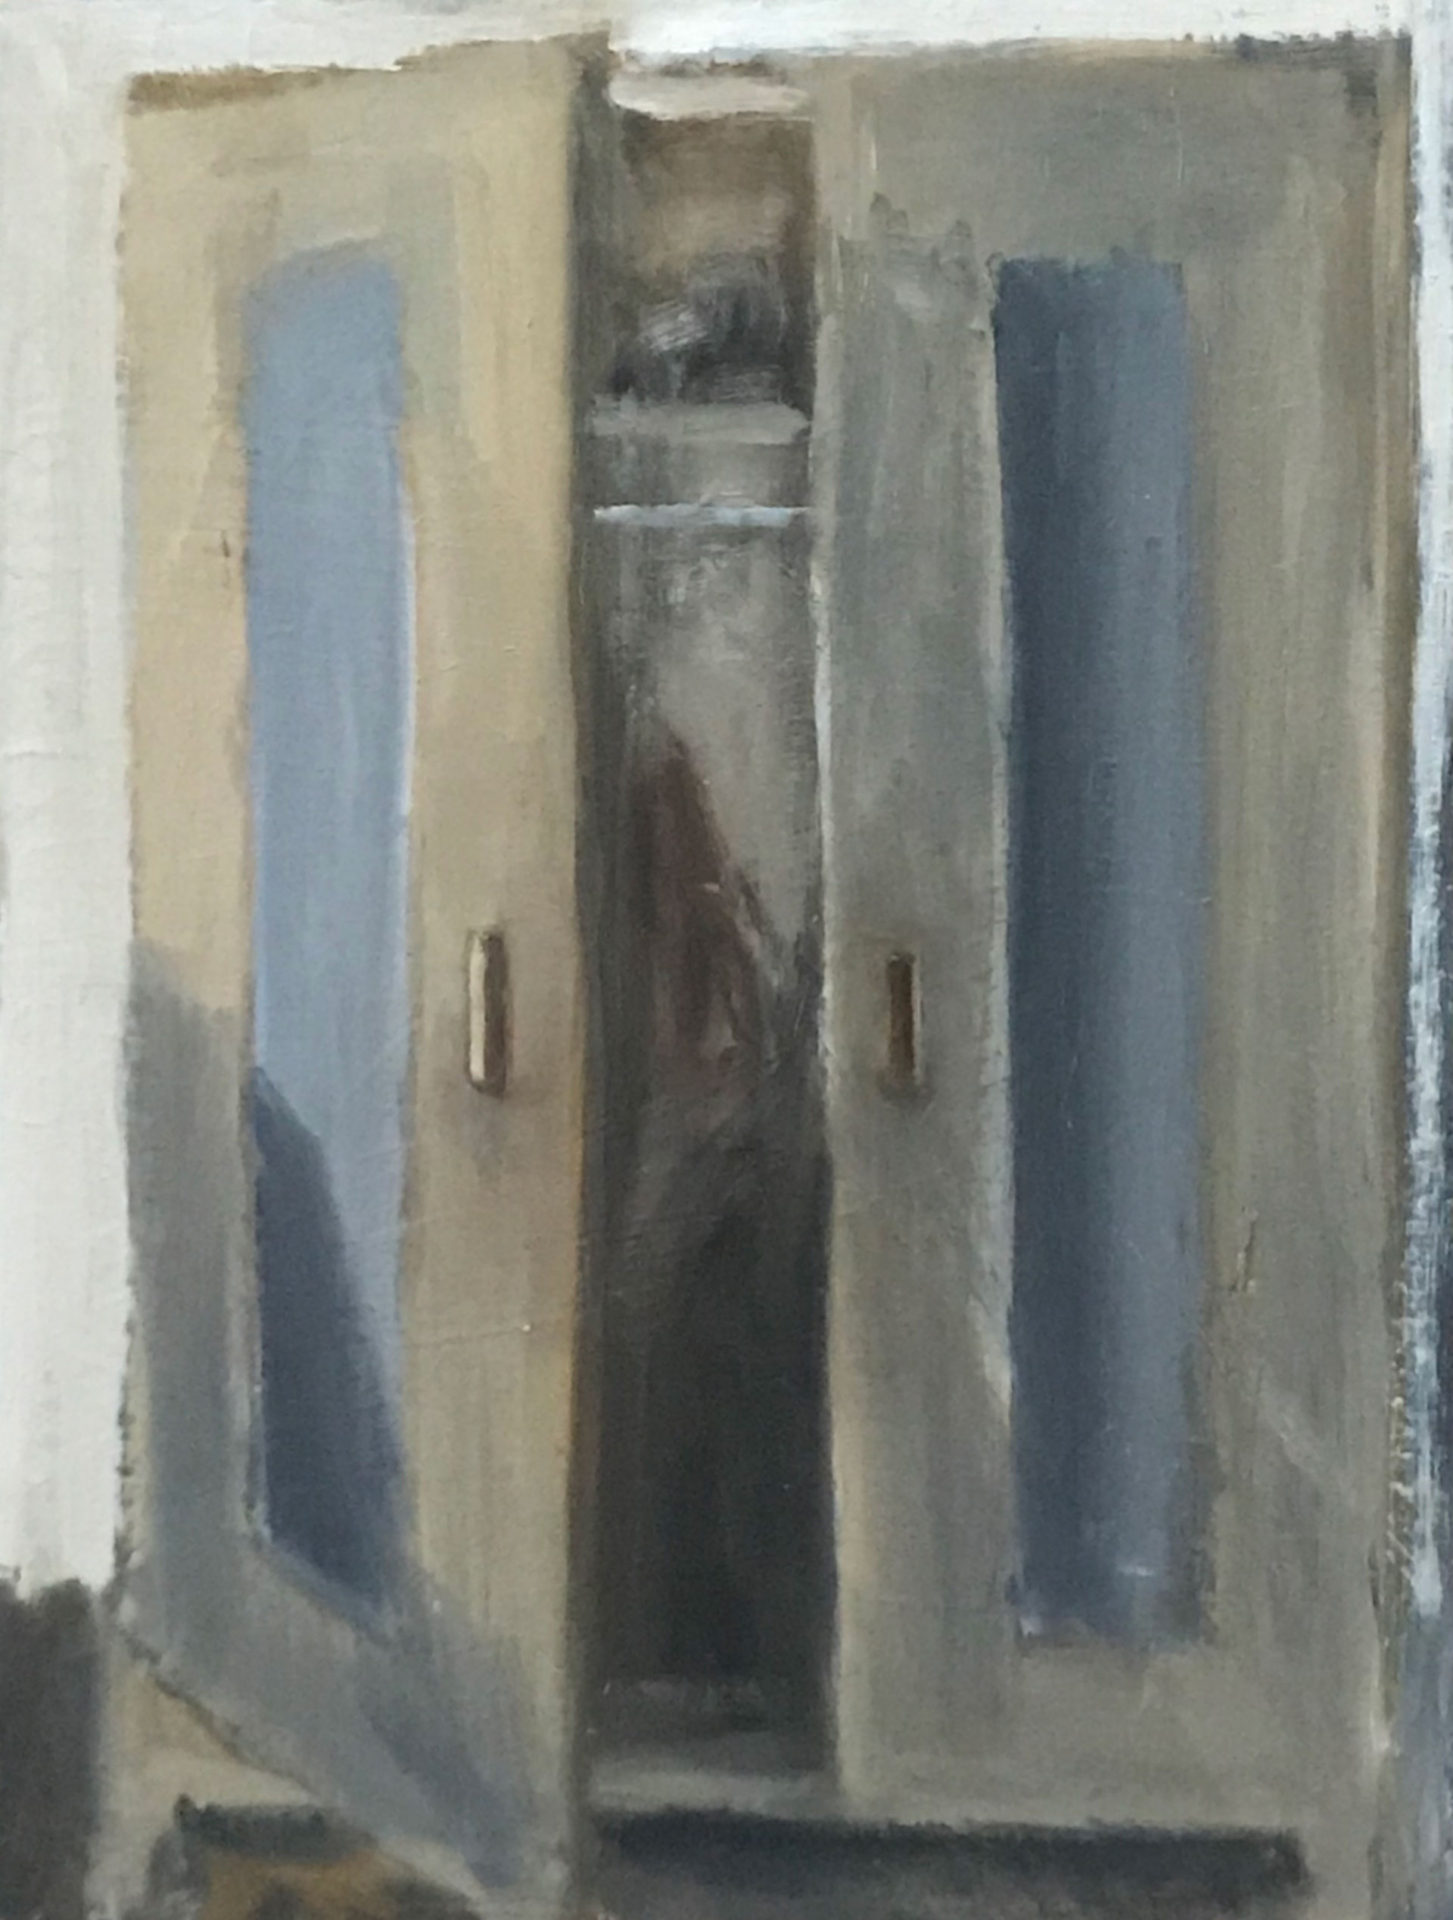 ‘Untitled’ from The Uncanny Nest, Oil on canvas, 31 x 41 cm